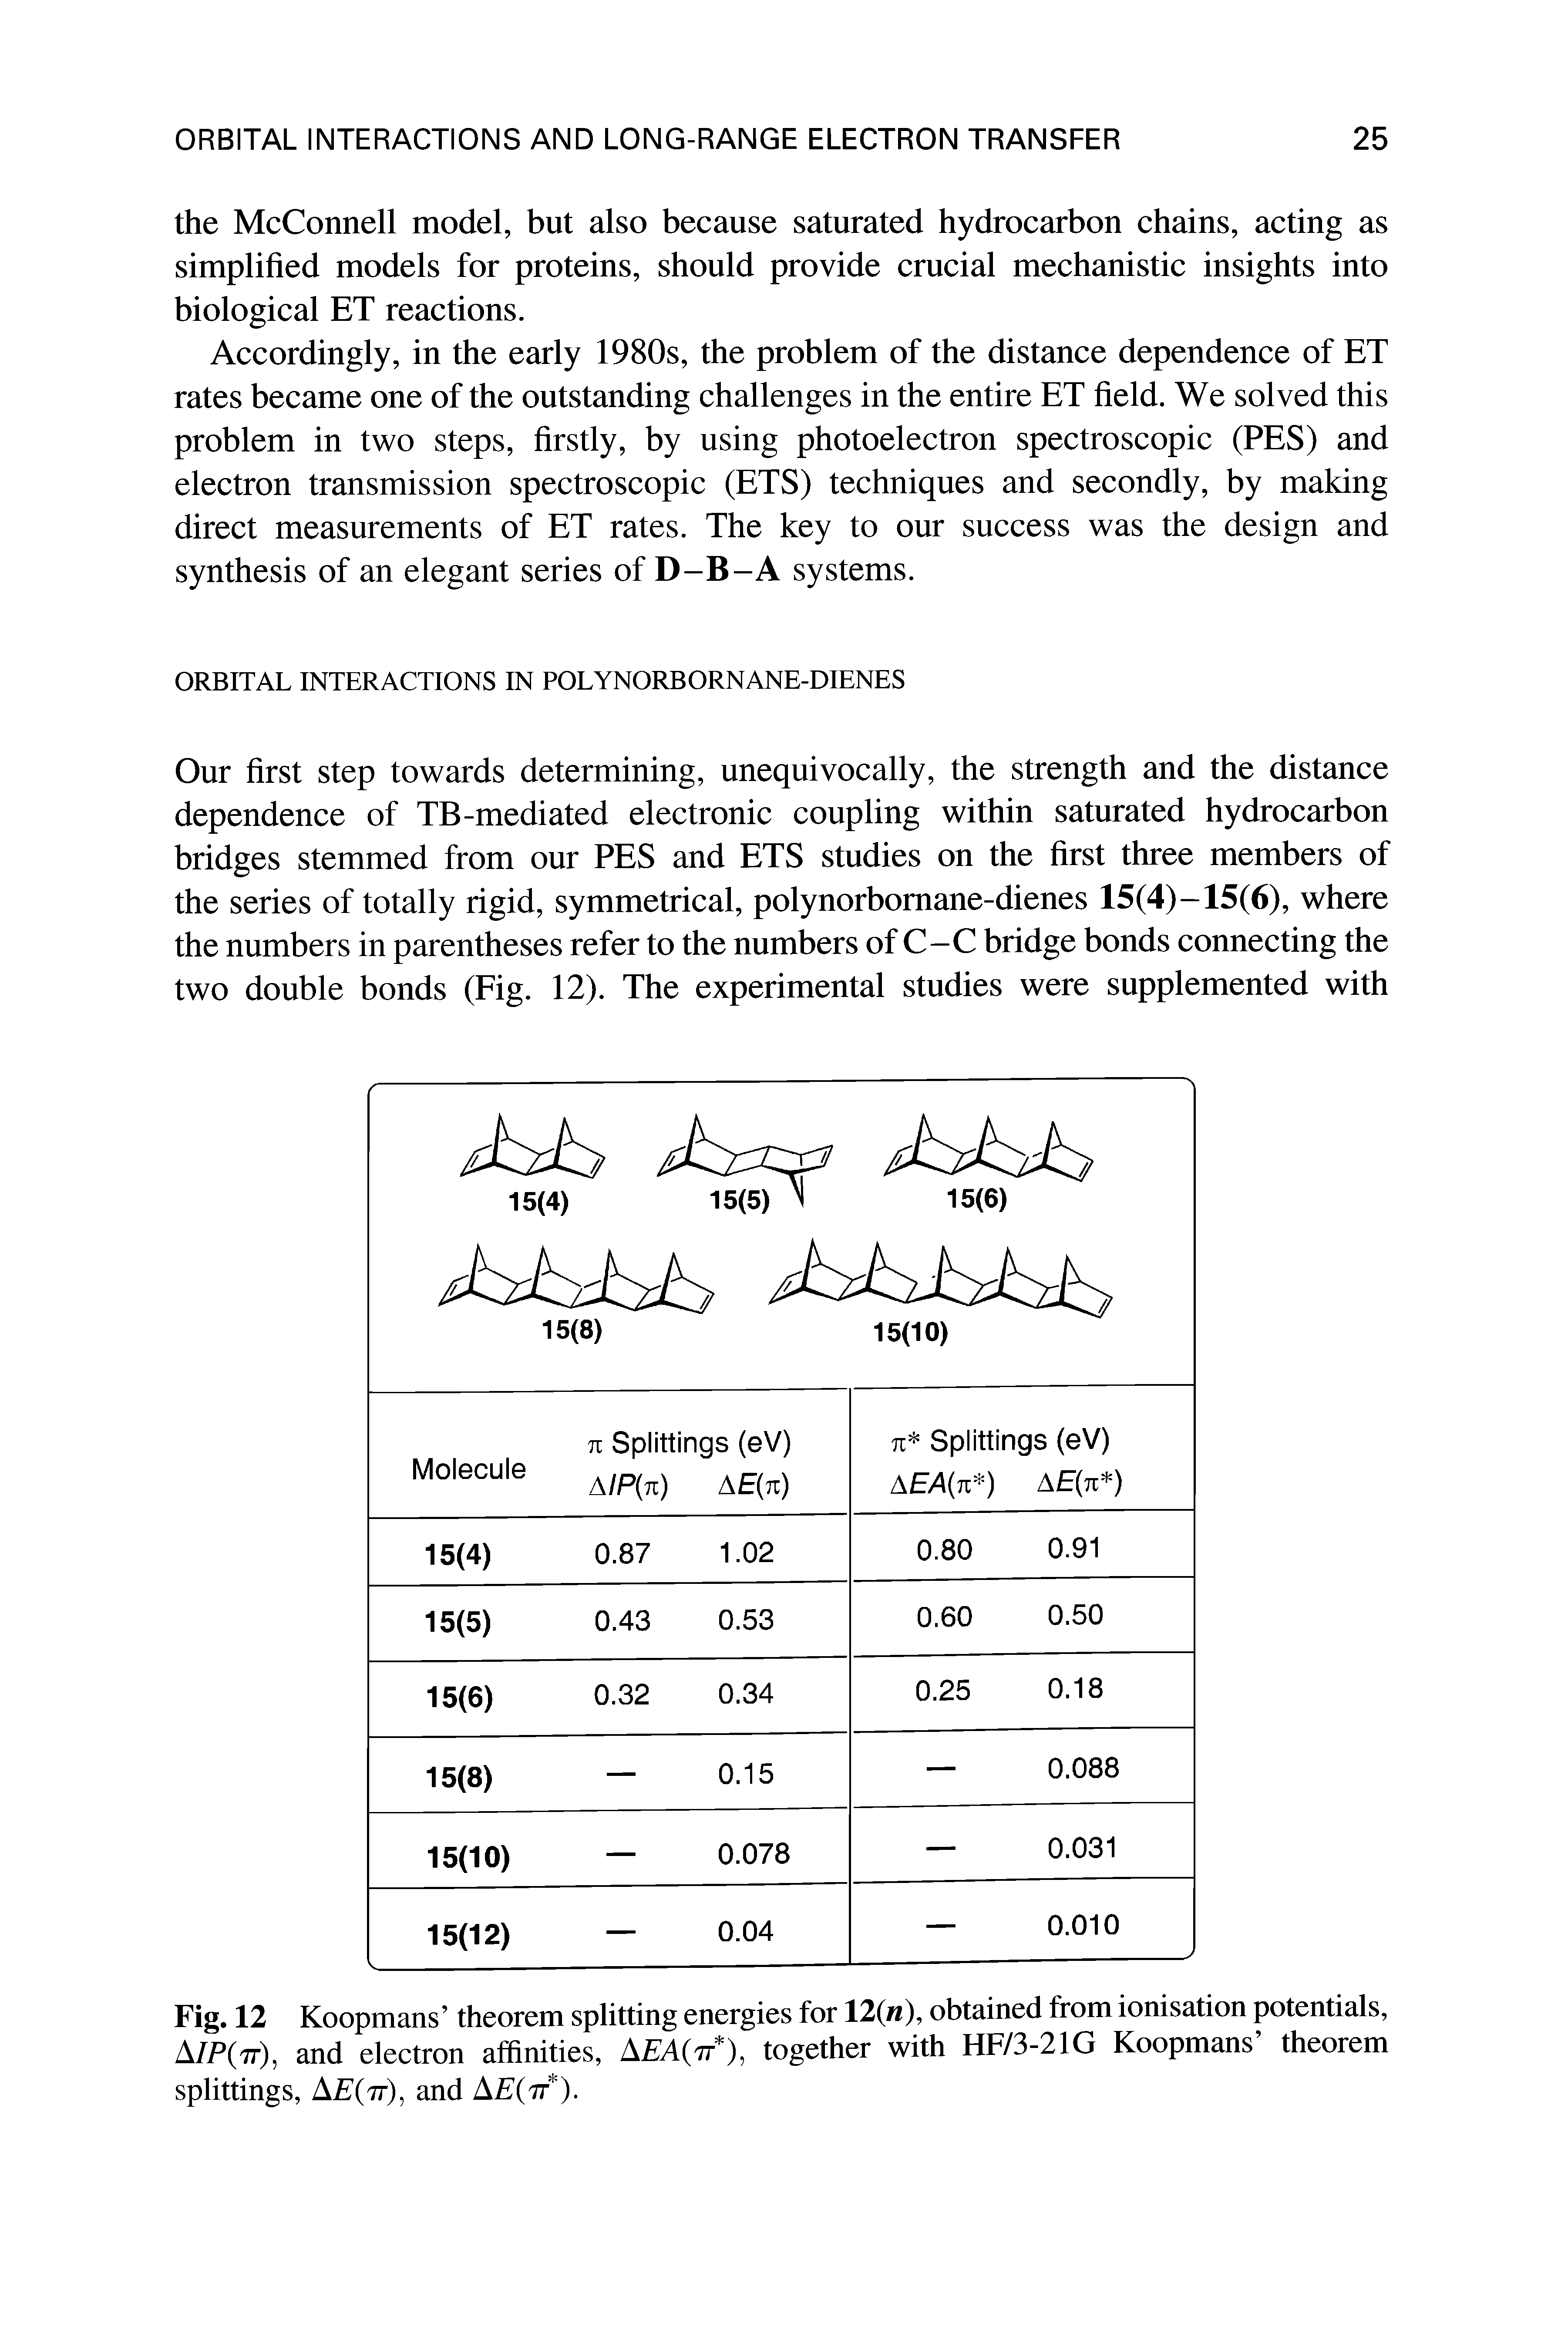 Fig. 12 Koopmans theorem splitting energies for 12(h), obtained from ionisation potentials, A/P(tt), and electron affinities, A A(tt ), together with HF/3-21G Koopmans theorem splittings, AE(tt), and...